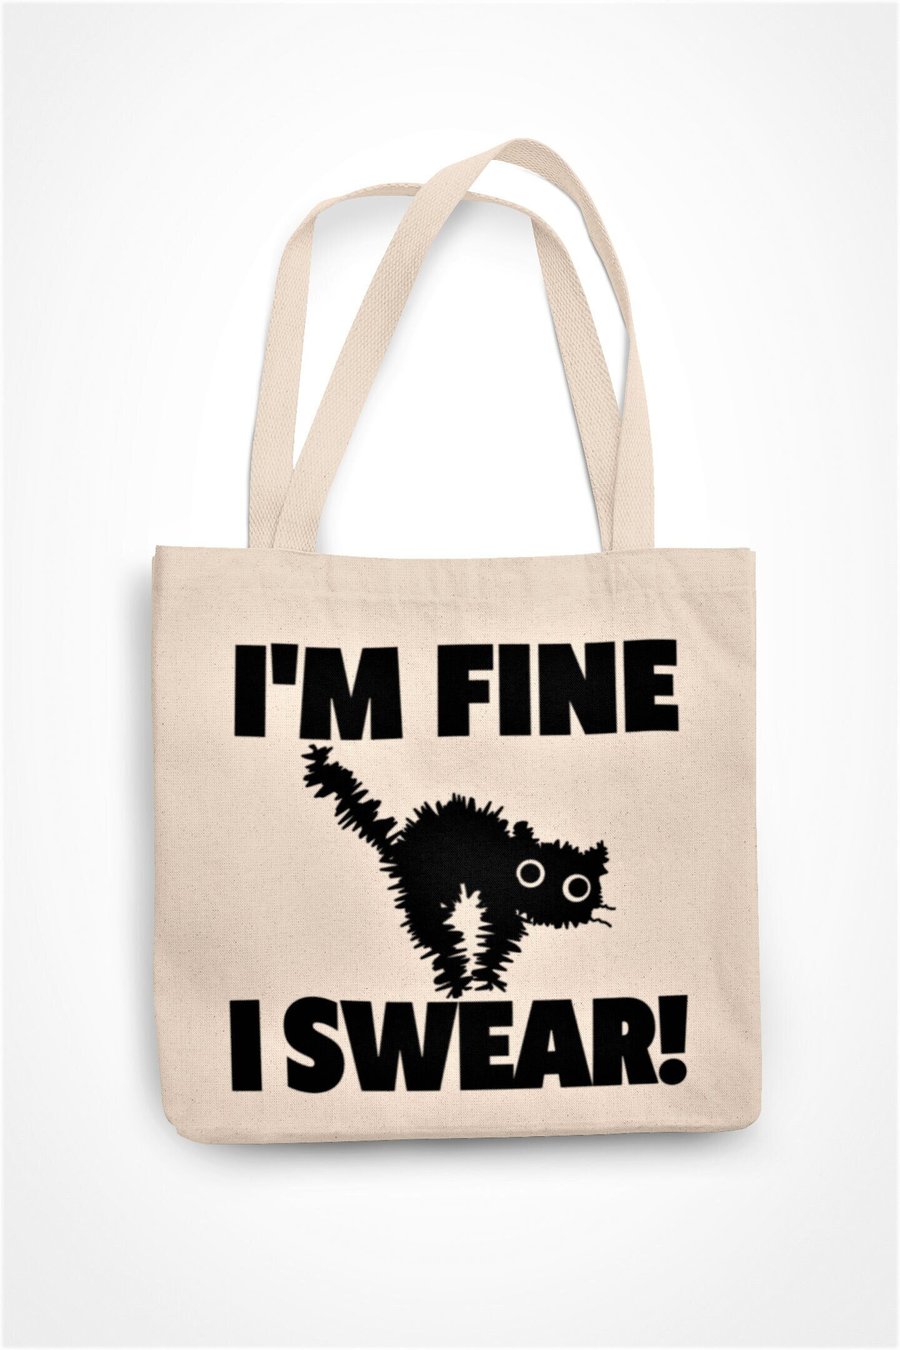 I'm Fine I Swear Tote Bag Funny Sarcastic Stressed Out Shopping Bag Birthday 